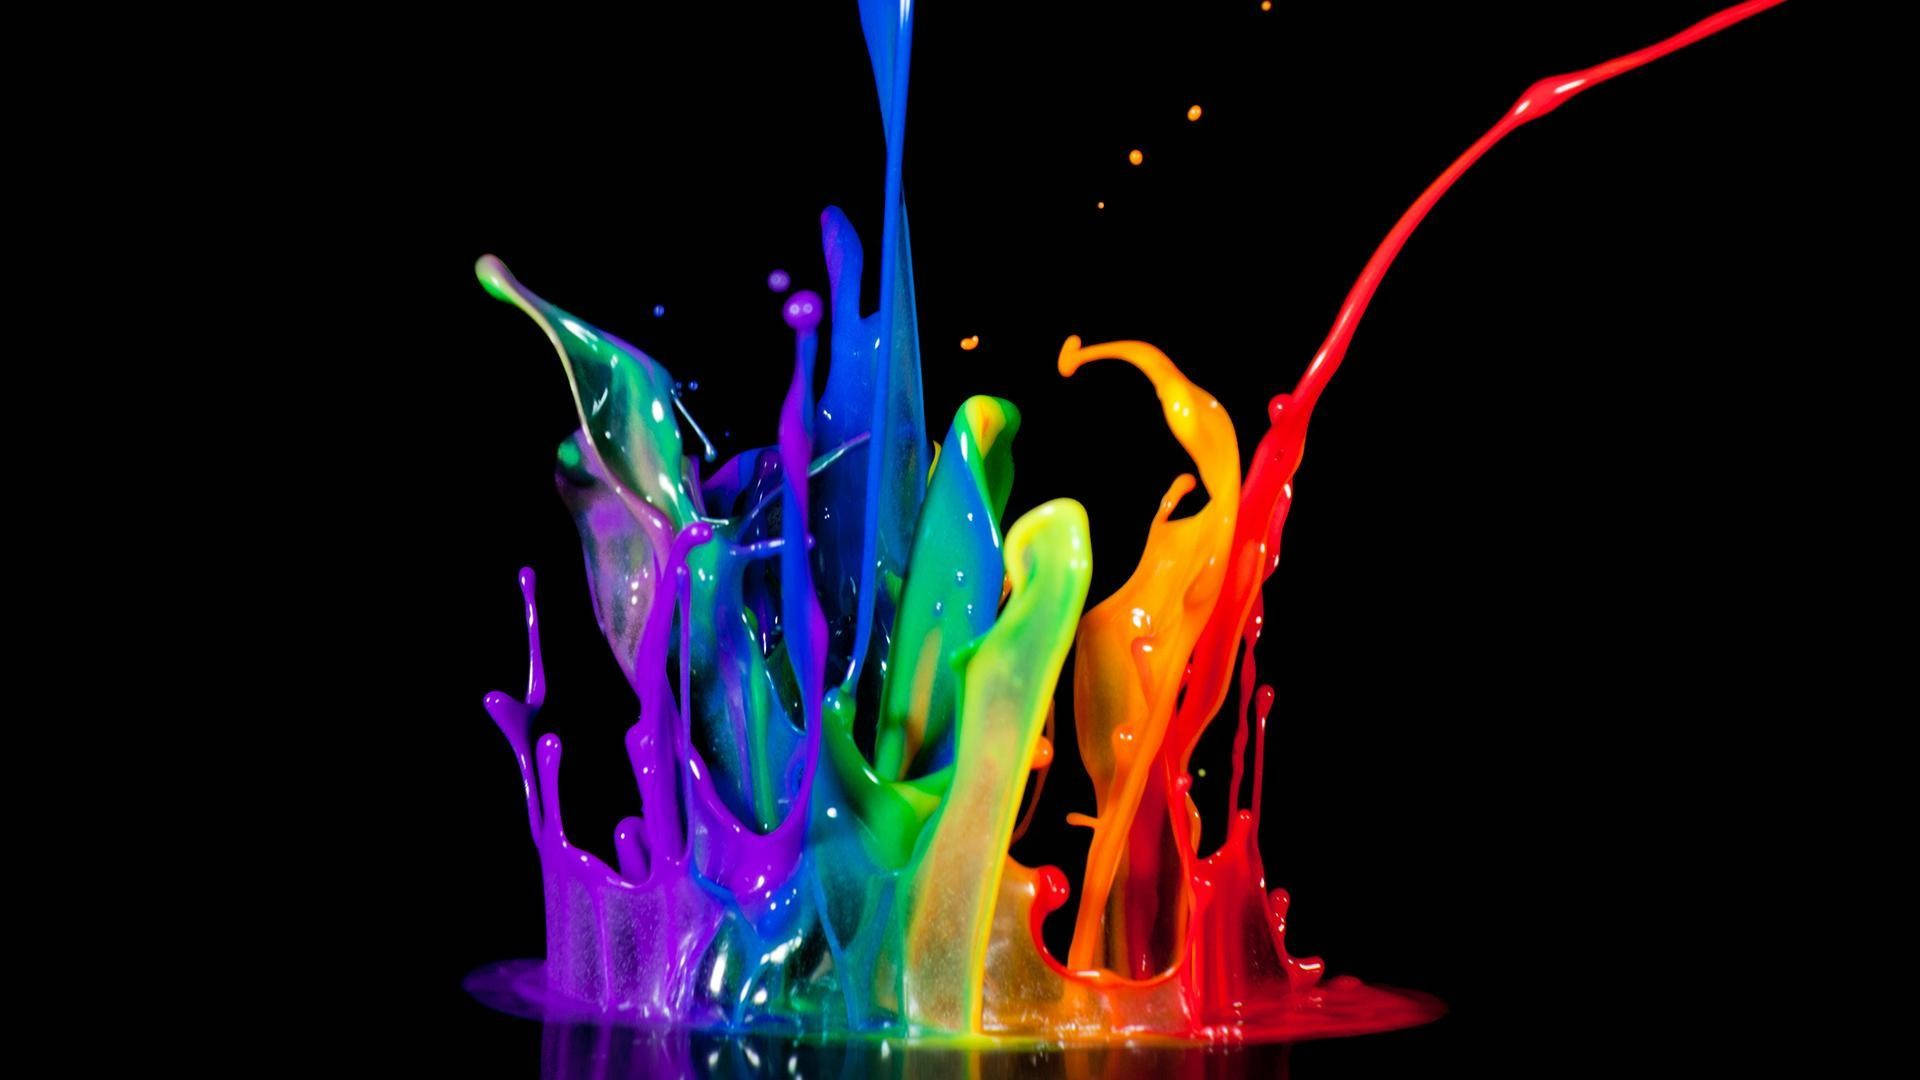 750+ Colorful Wallpaper Pictures | Download Free Images on Unsplash